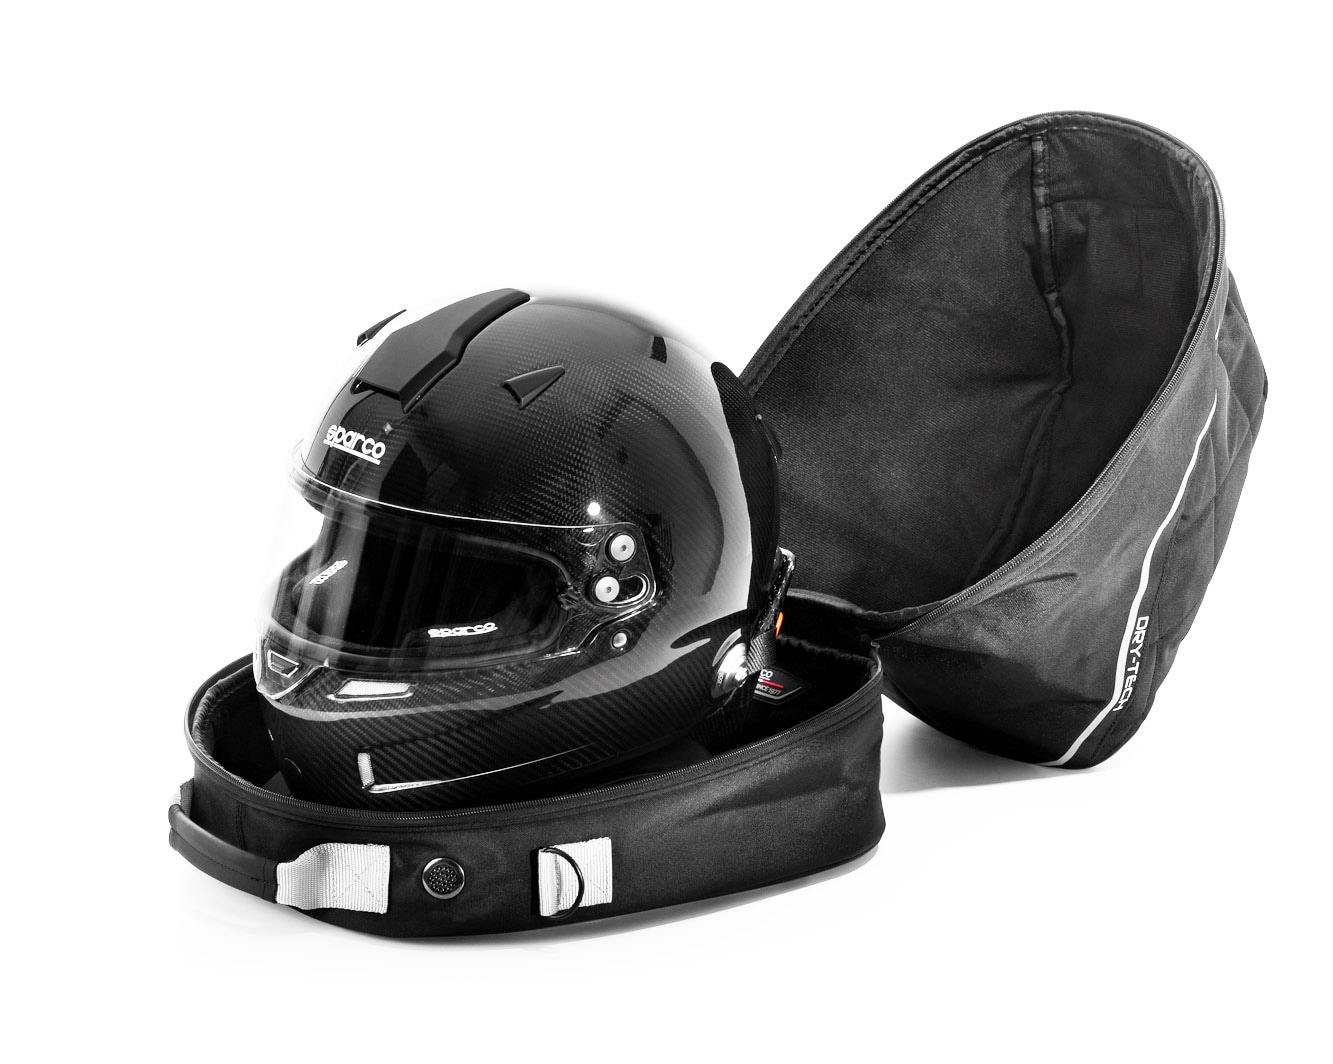 Helmet bag Sparco Dry-Tech with fan system